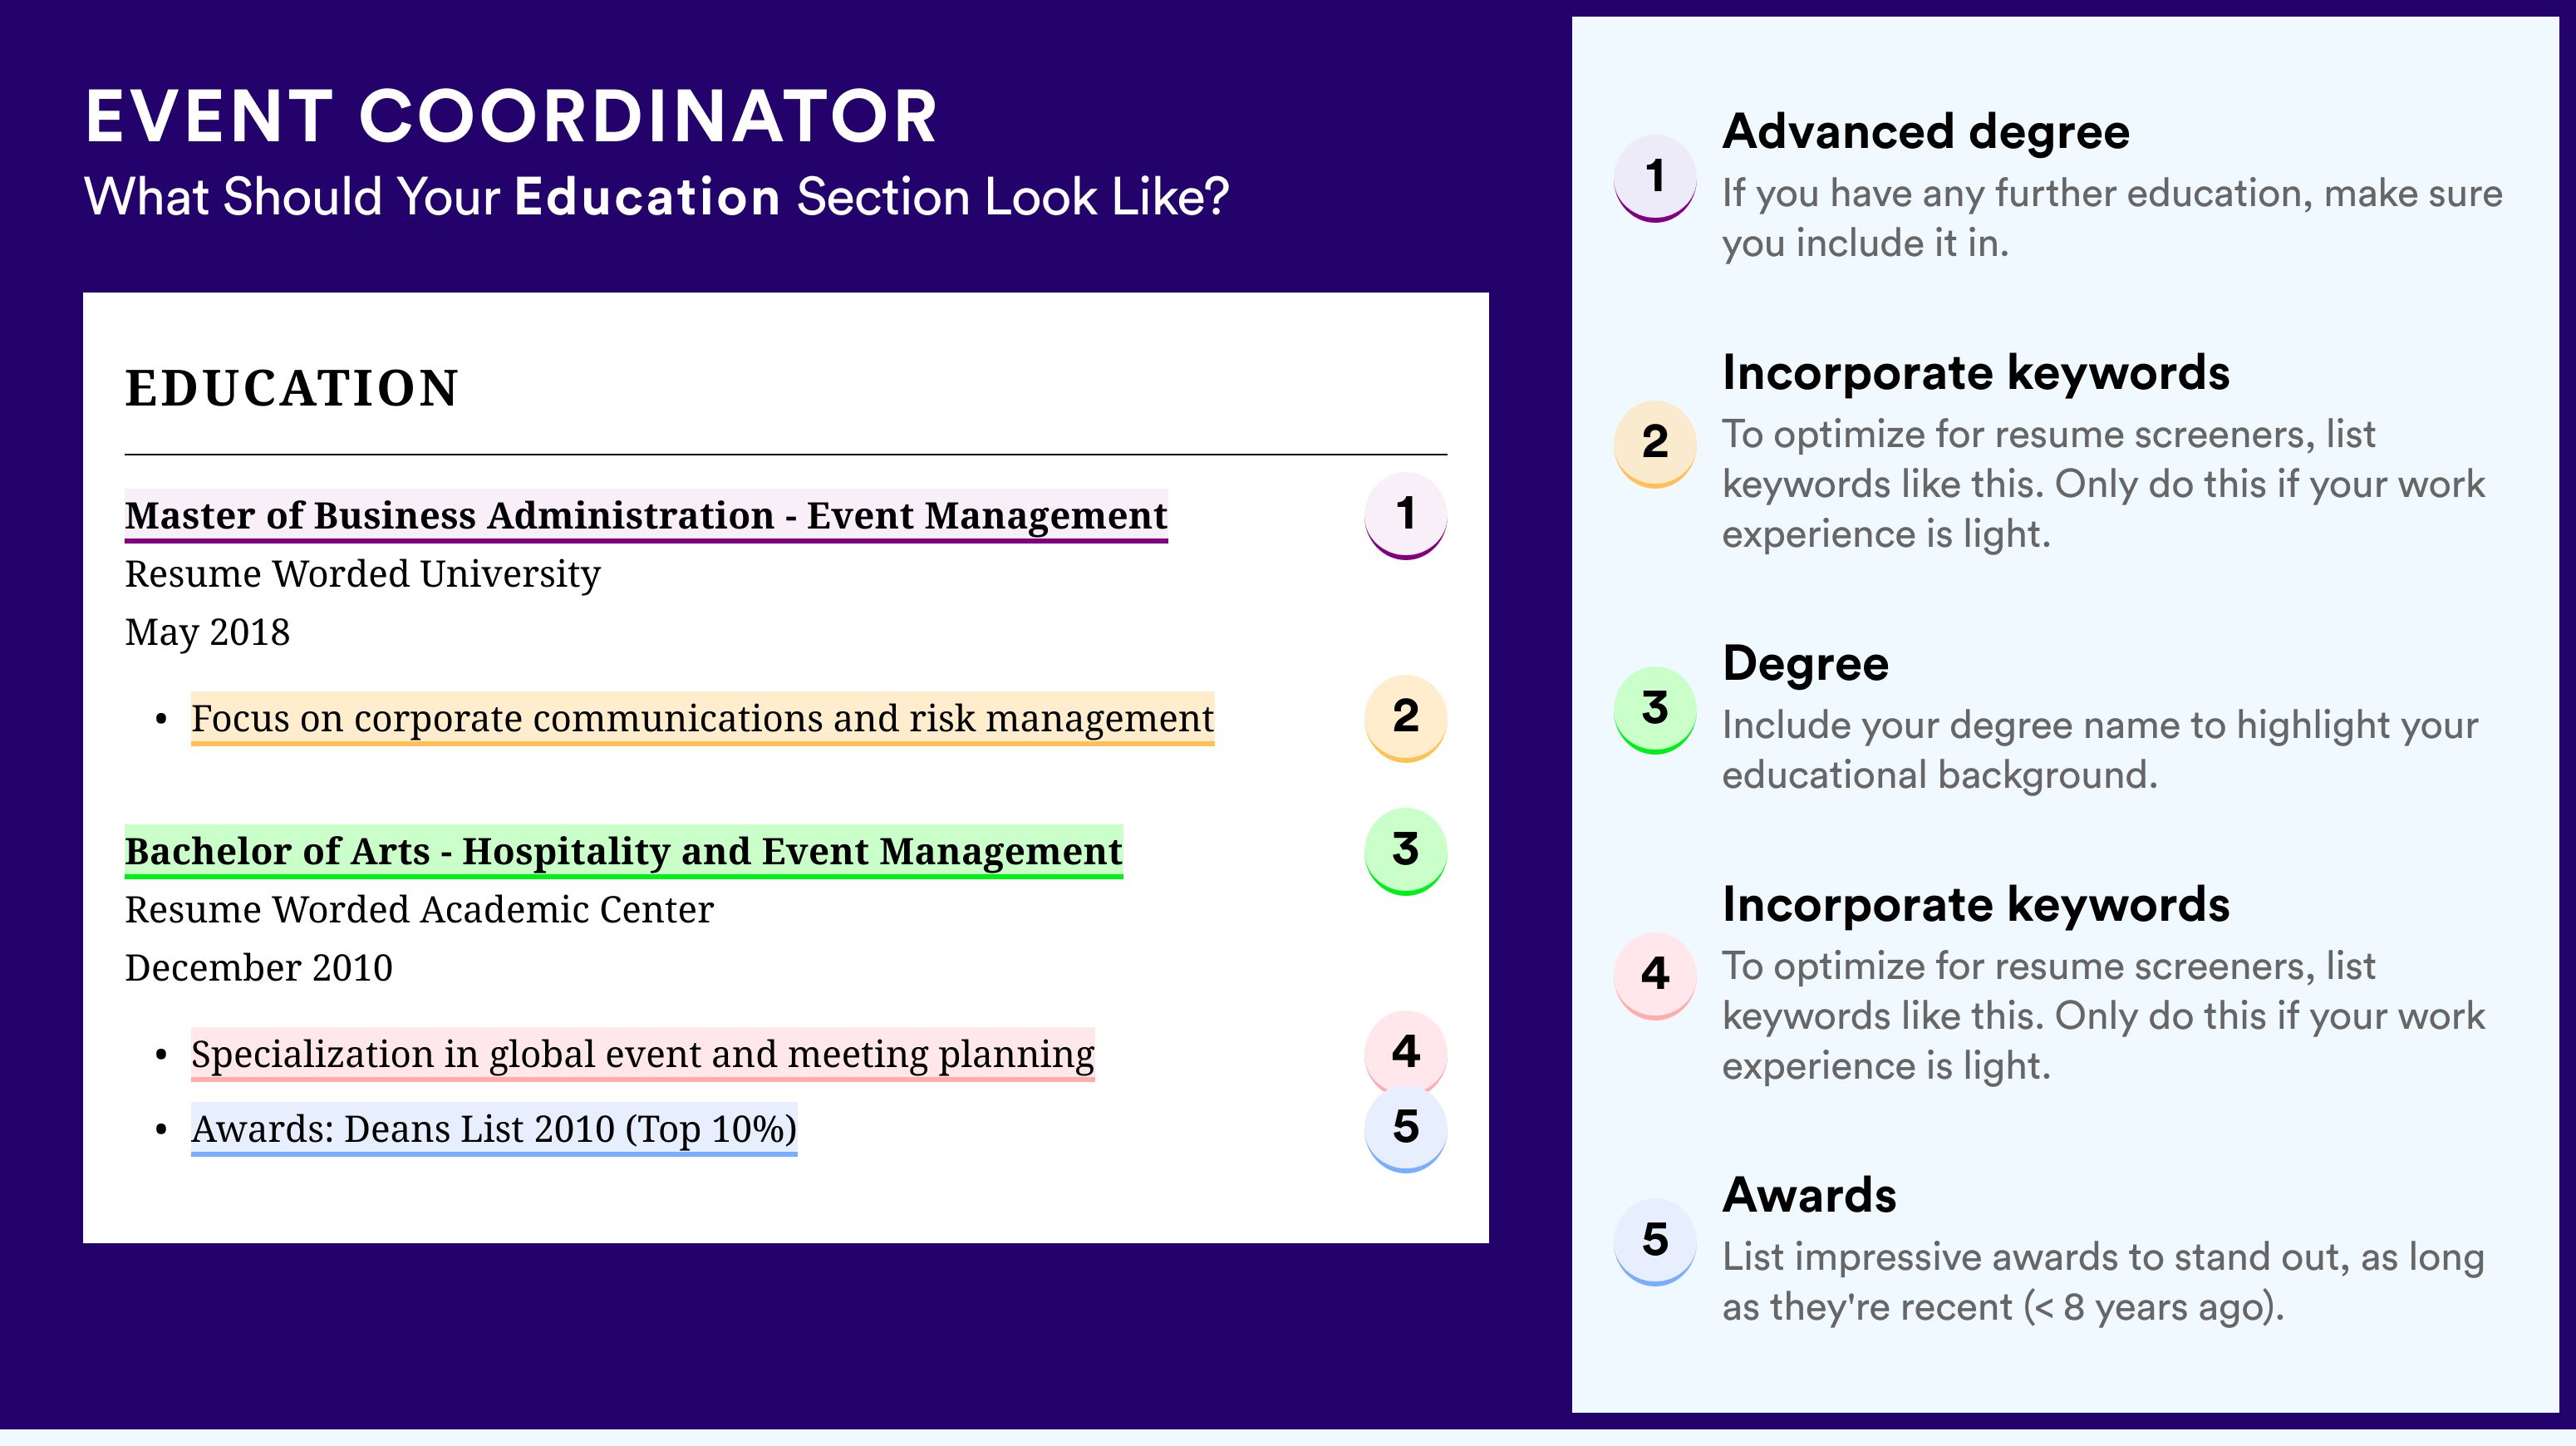 How To Write An Education Section - Event Coordinator Roles